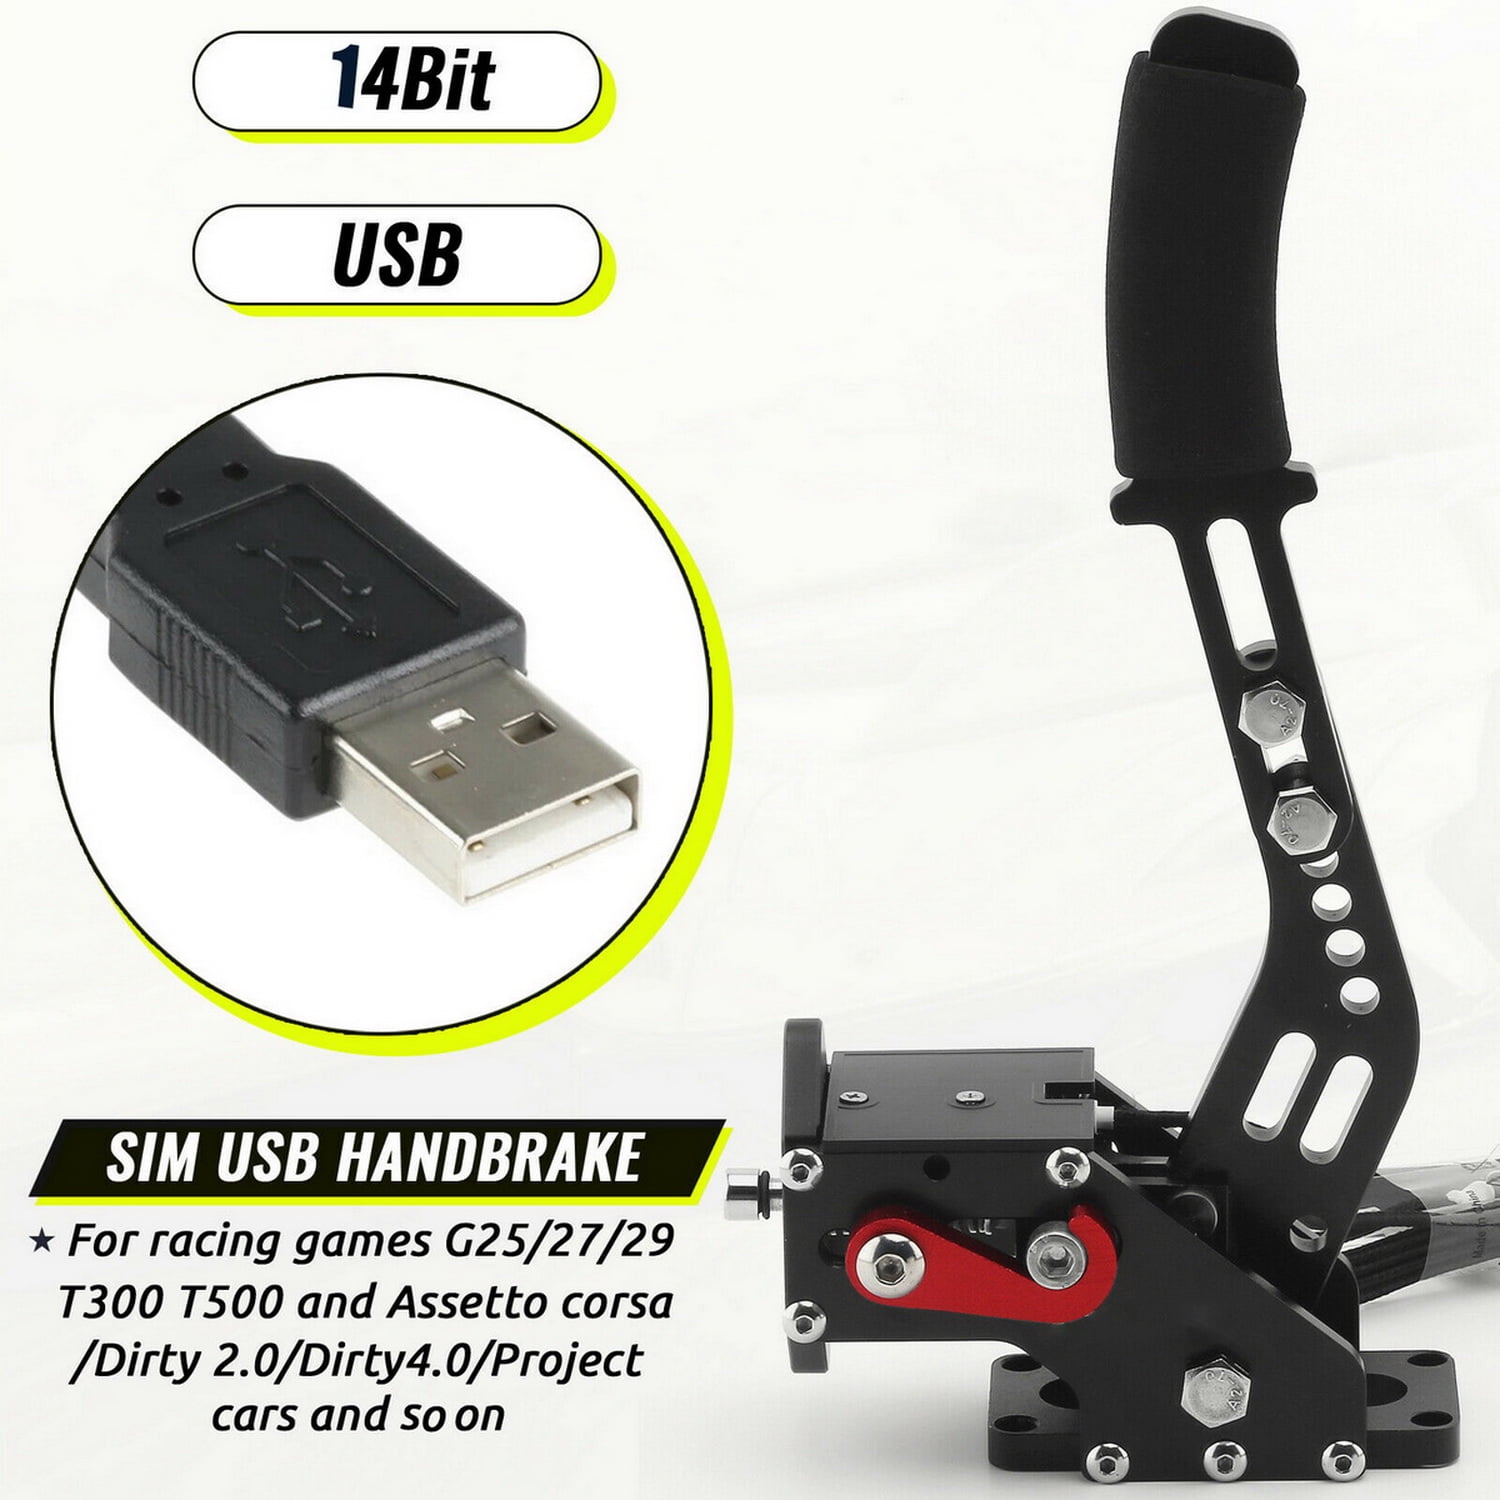 Upgrade 16-Bit PC USB Handbrake for Racing Games，Analog Linear Braking  Performance, Compatible with Logitech G27/G29/G920/G923 T500 T300，with